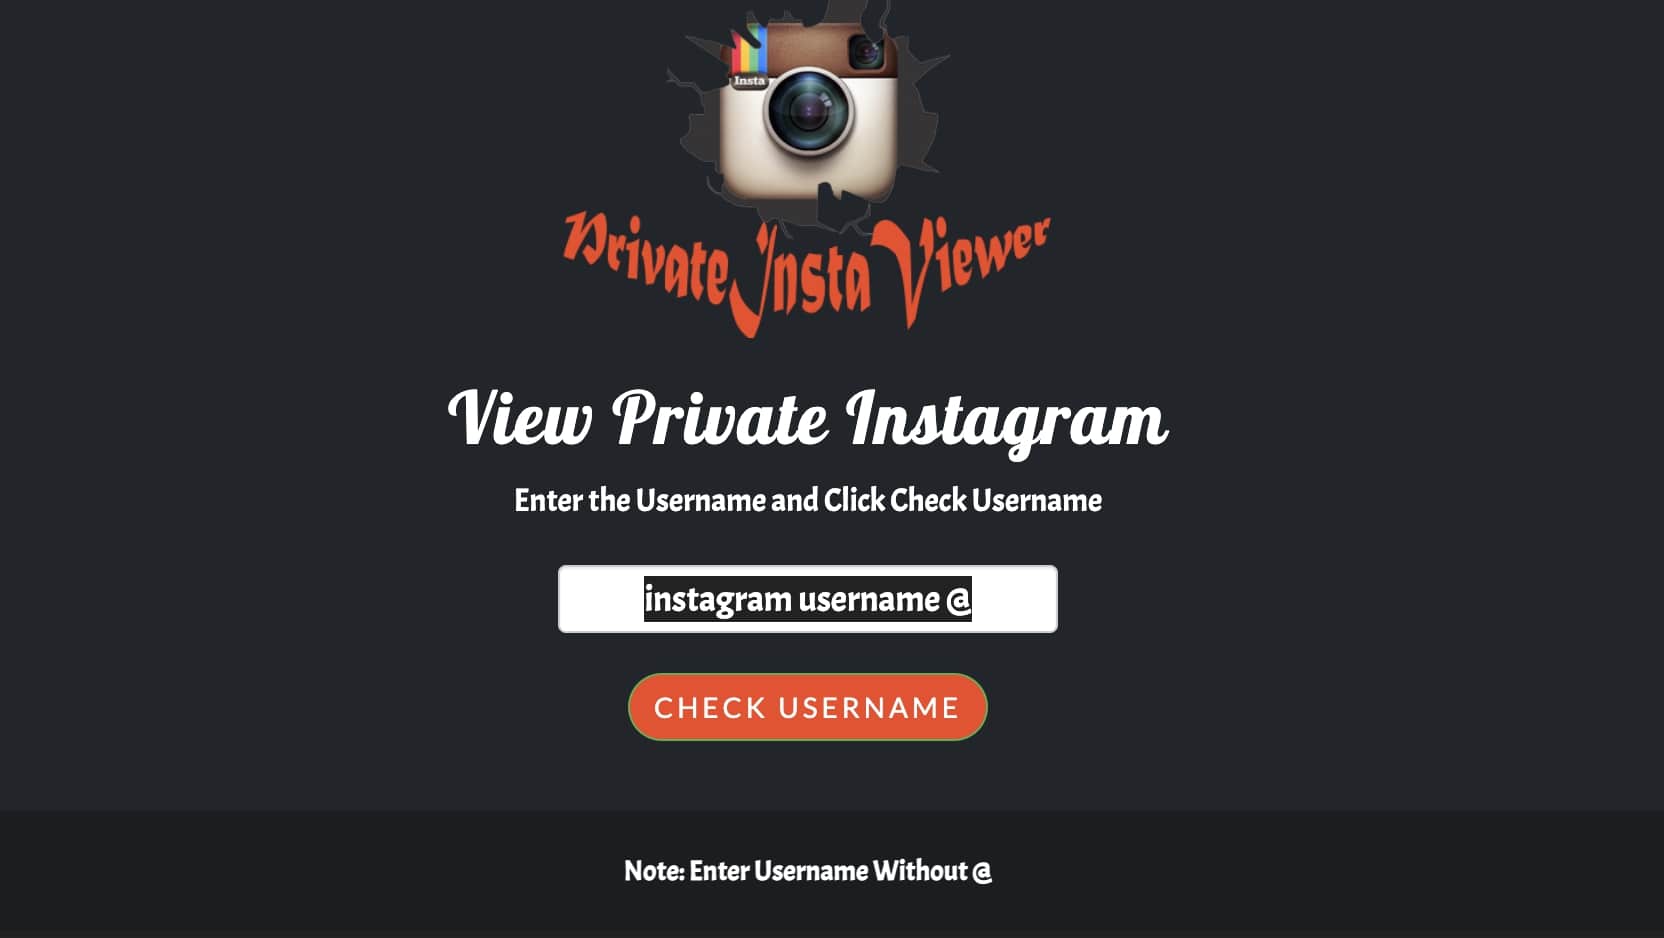  view-private-Instagram-account-Private-Insta-Viewer  